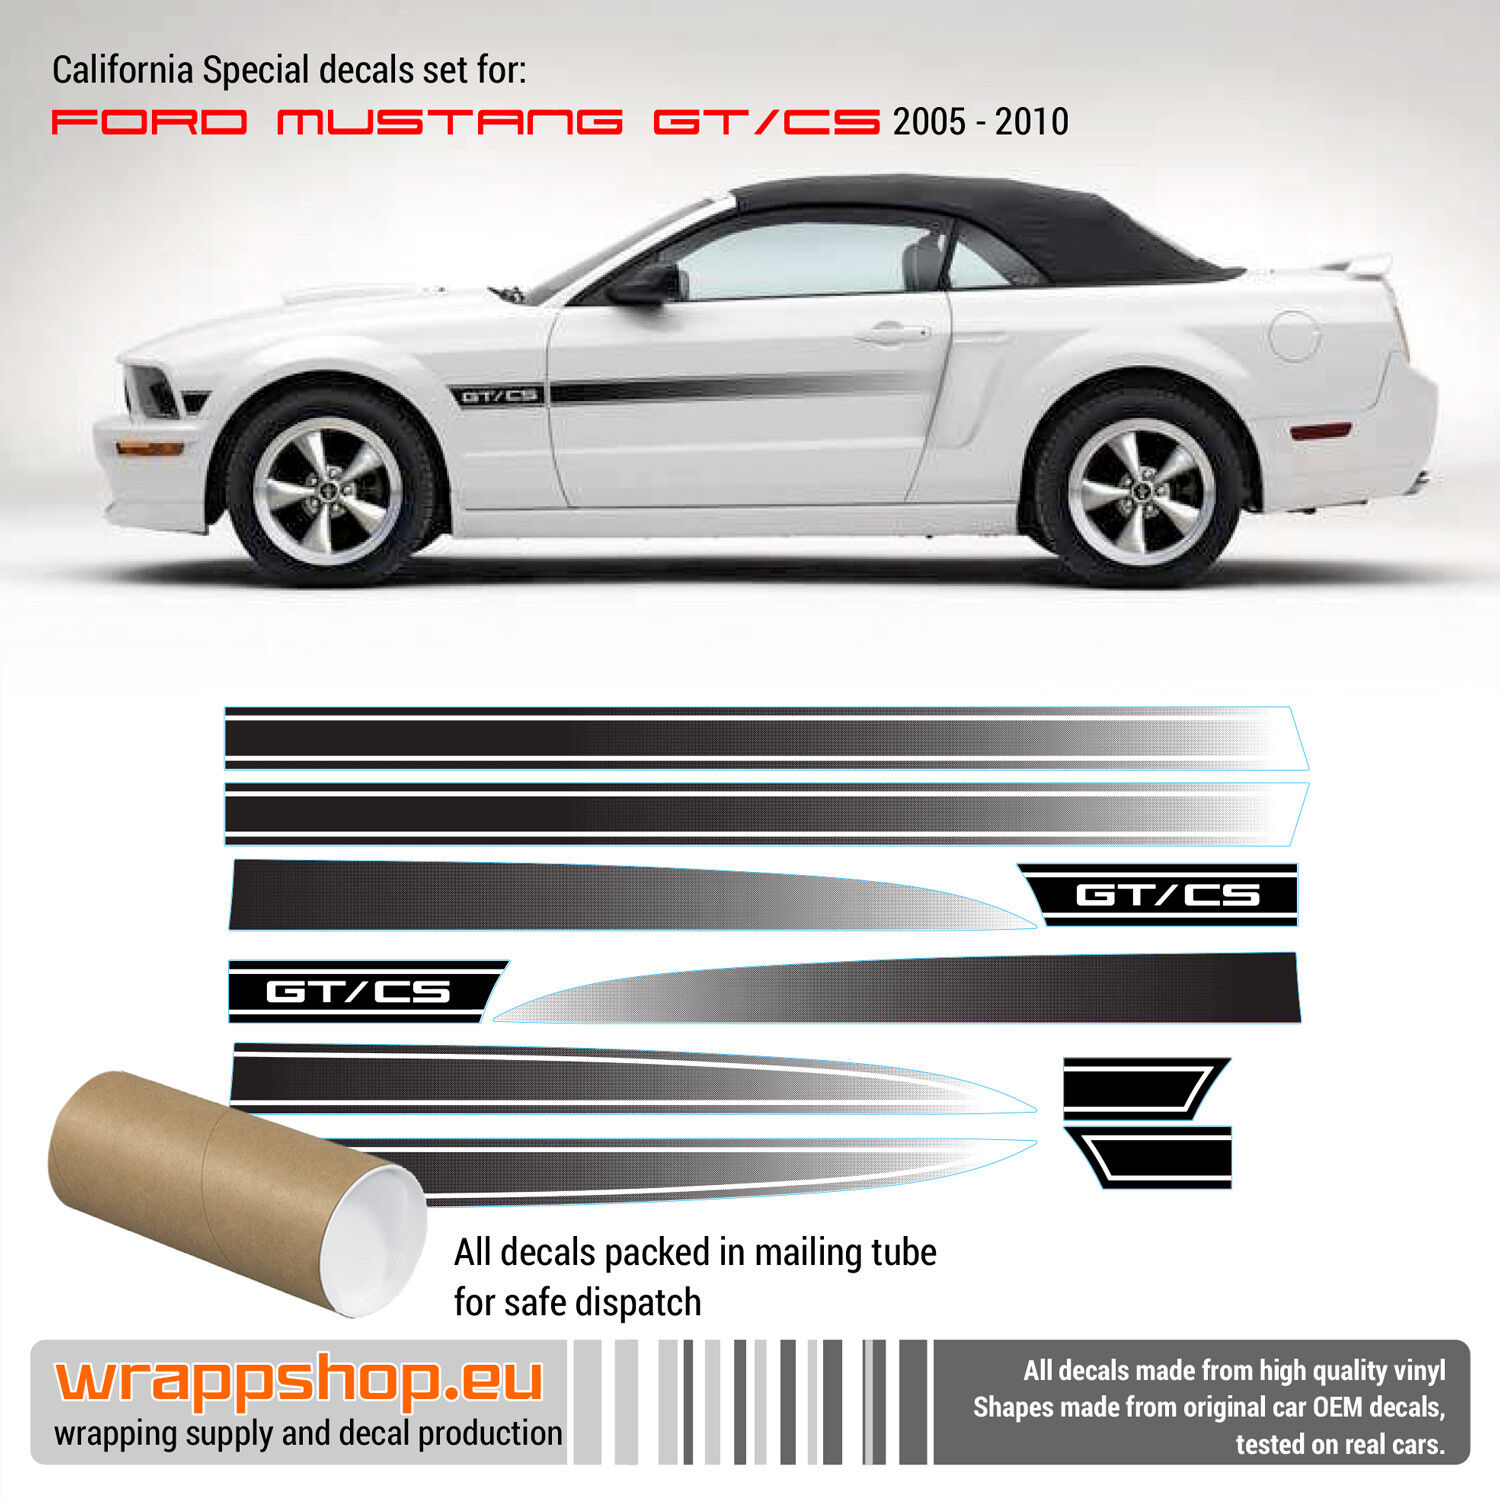 California Special GT/CS Faded Stripes Decal 2005 2006 2007 2008 2009 2010